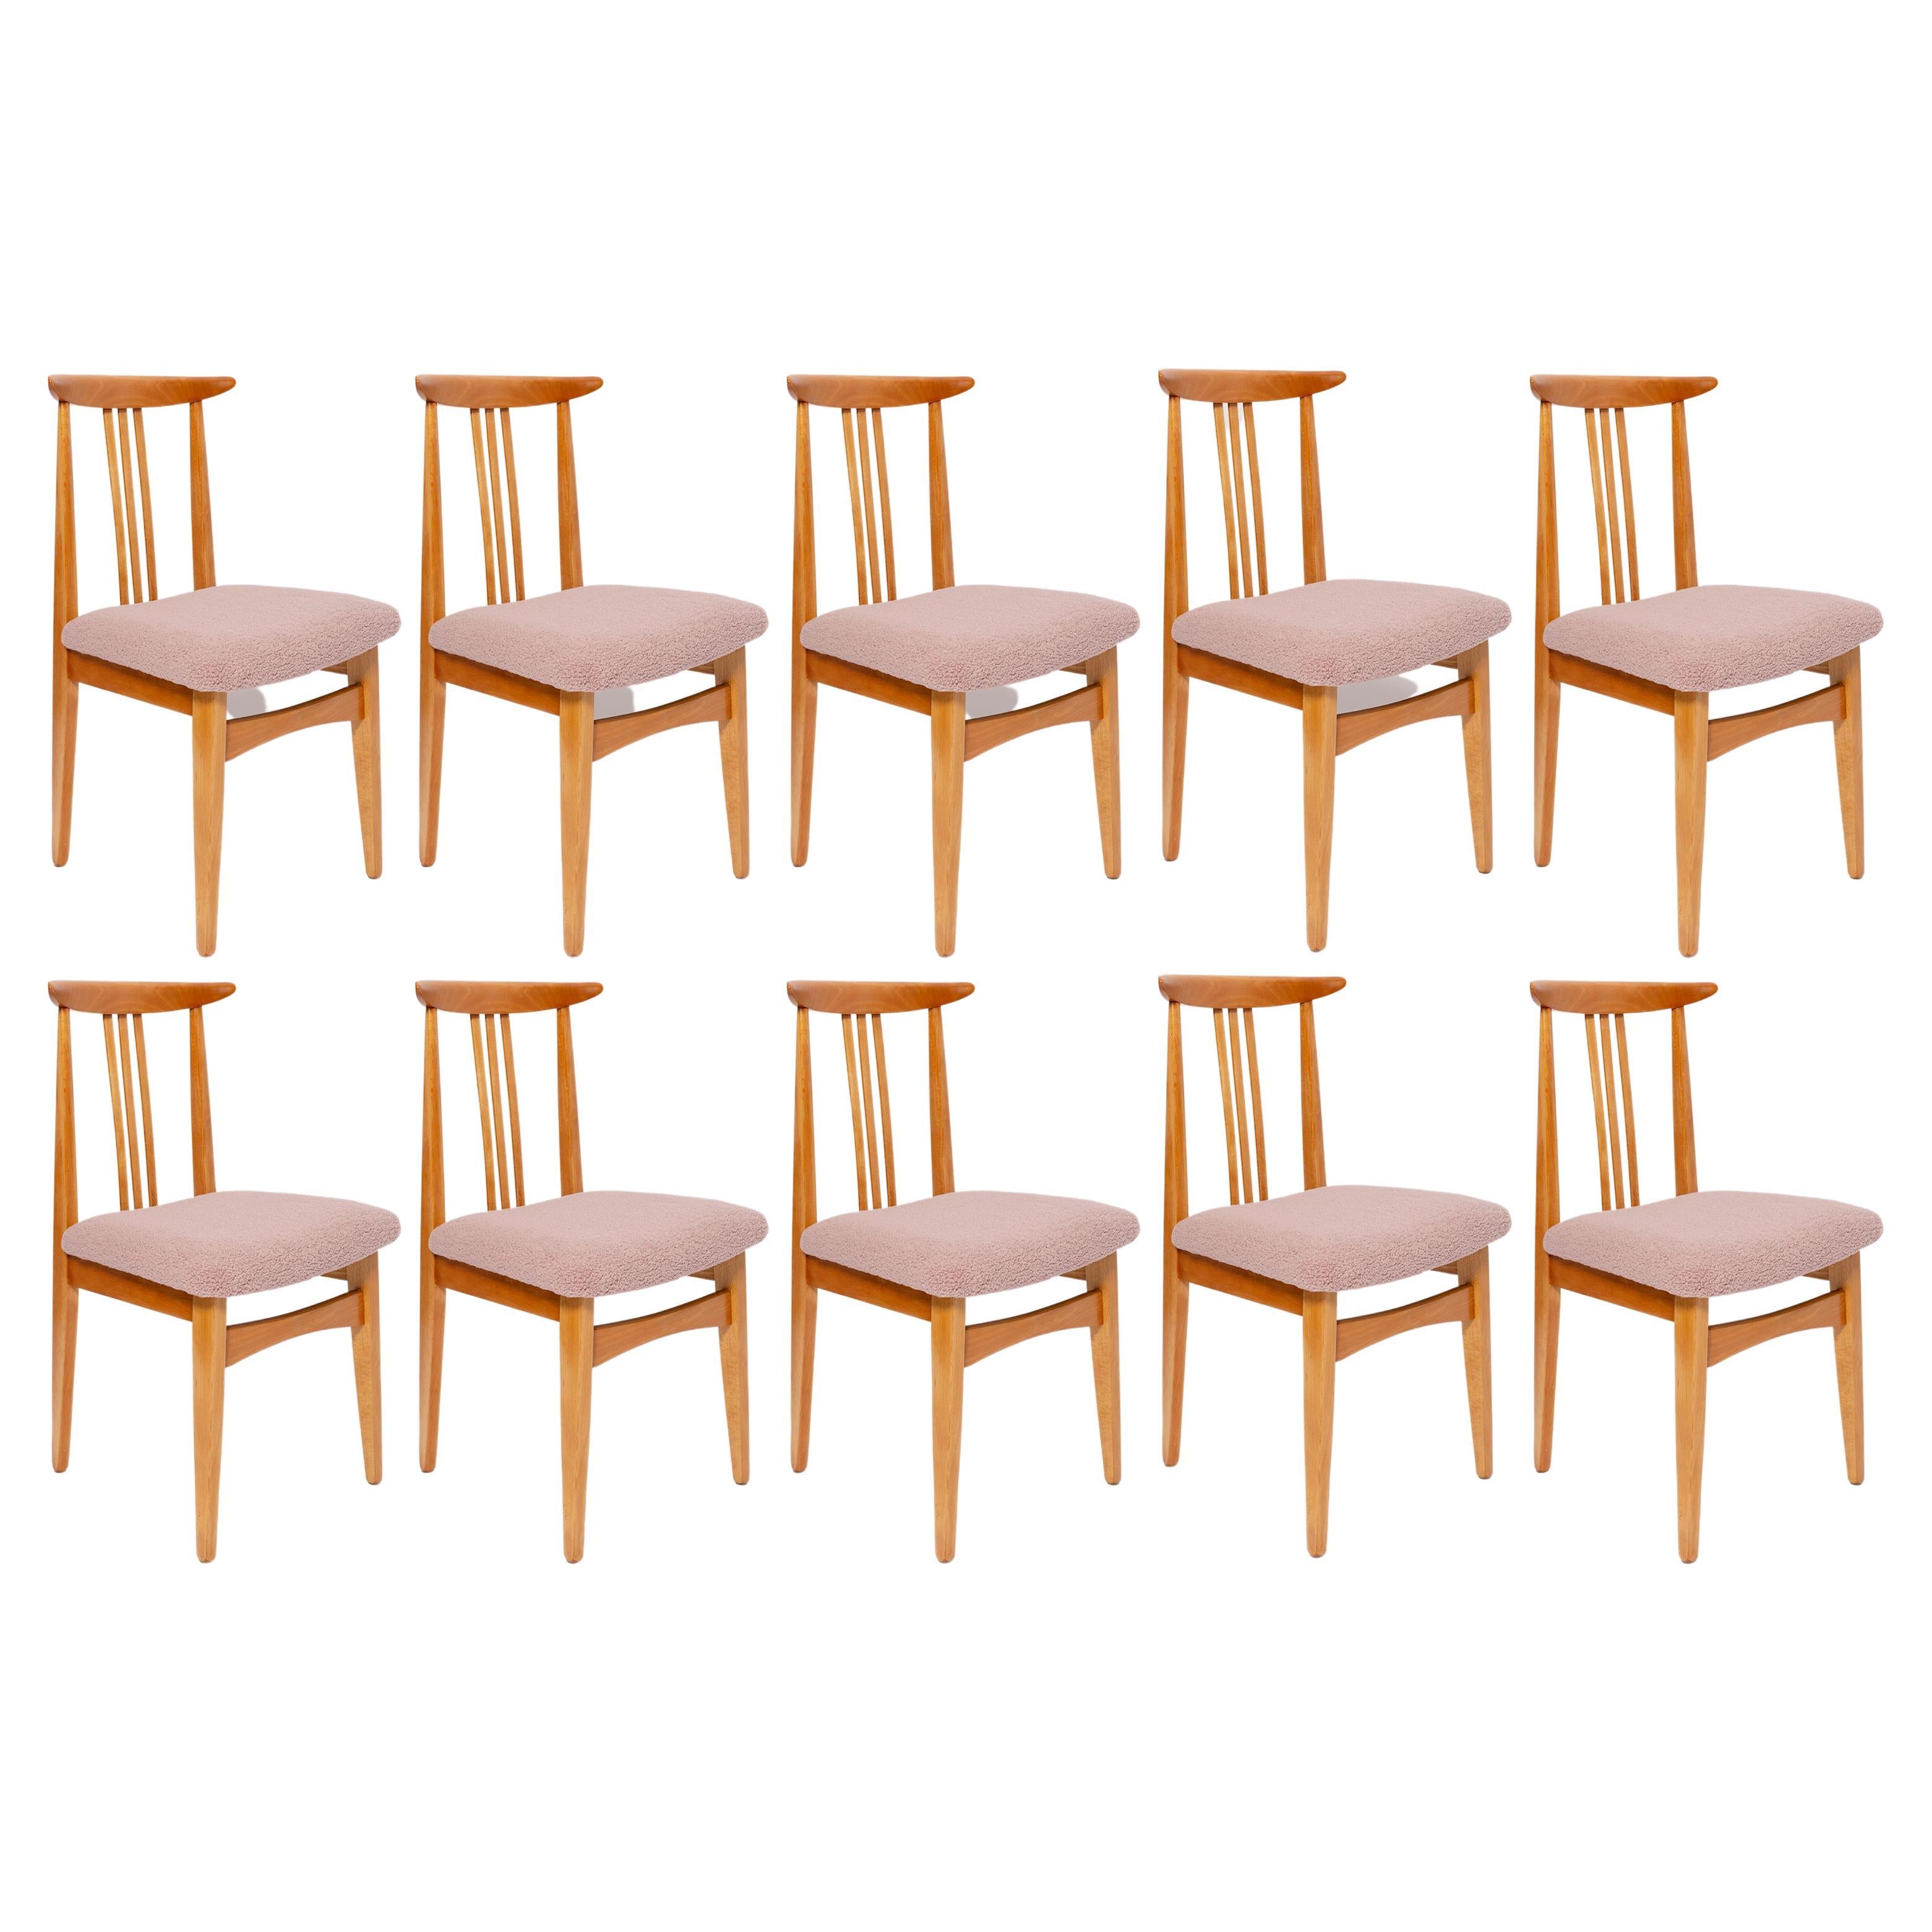 Ten Mid-Century Pink Blush Boucle Chairs, Light Wood, M. Zielinski, Europe 1960s For Sale